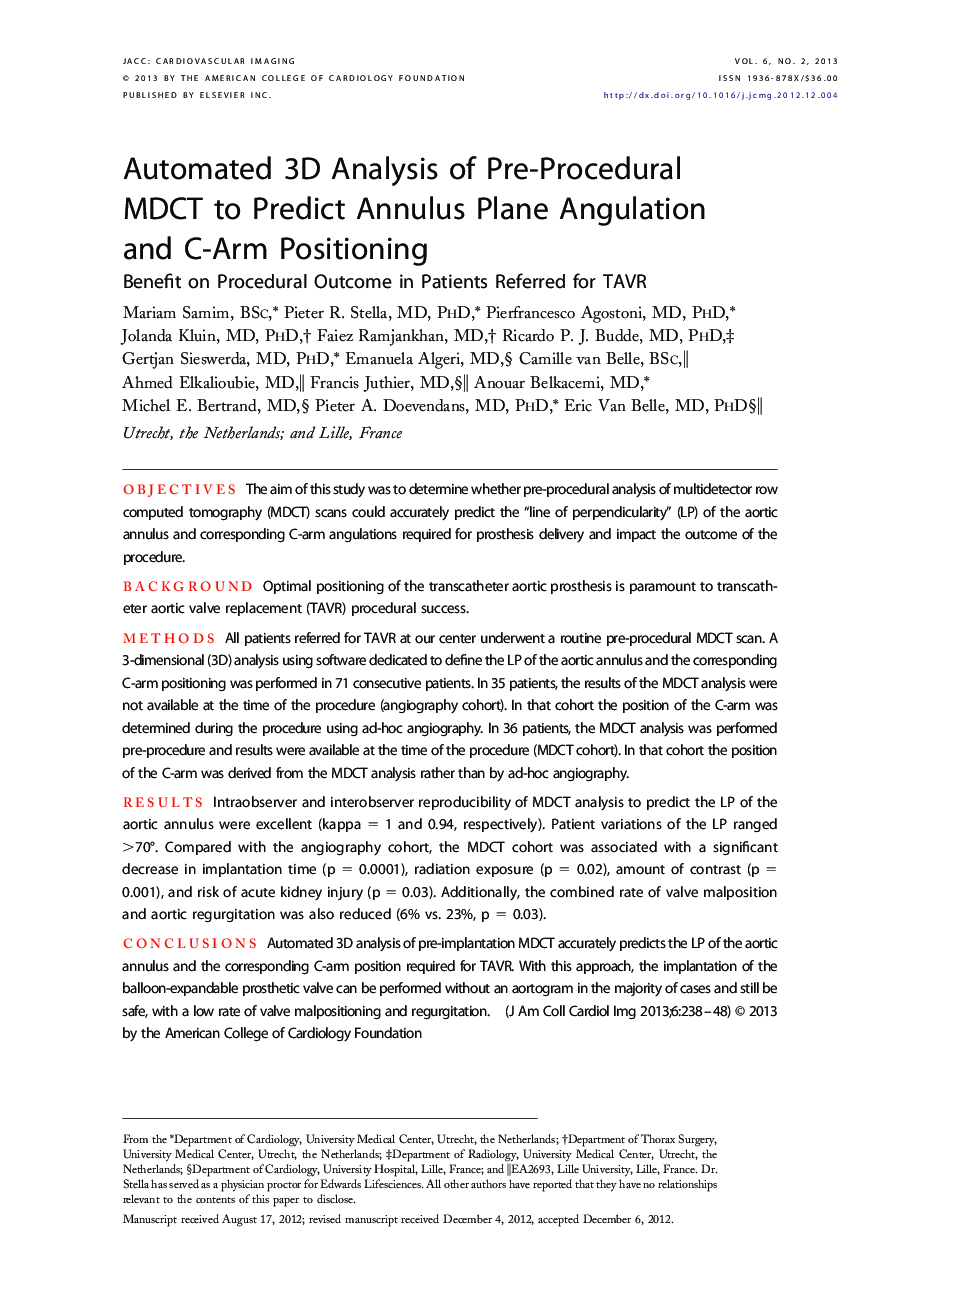 Automated 3D Analysis of Pre-Procedural MDCT to Predict Annulus Plane Angulation and C-Arm Positioning : Benefit on Procedural Outcome in Patients Referred for TAVR